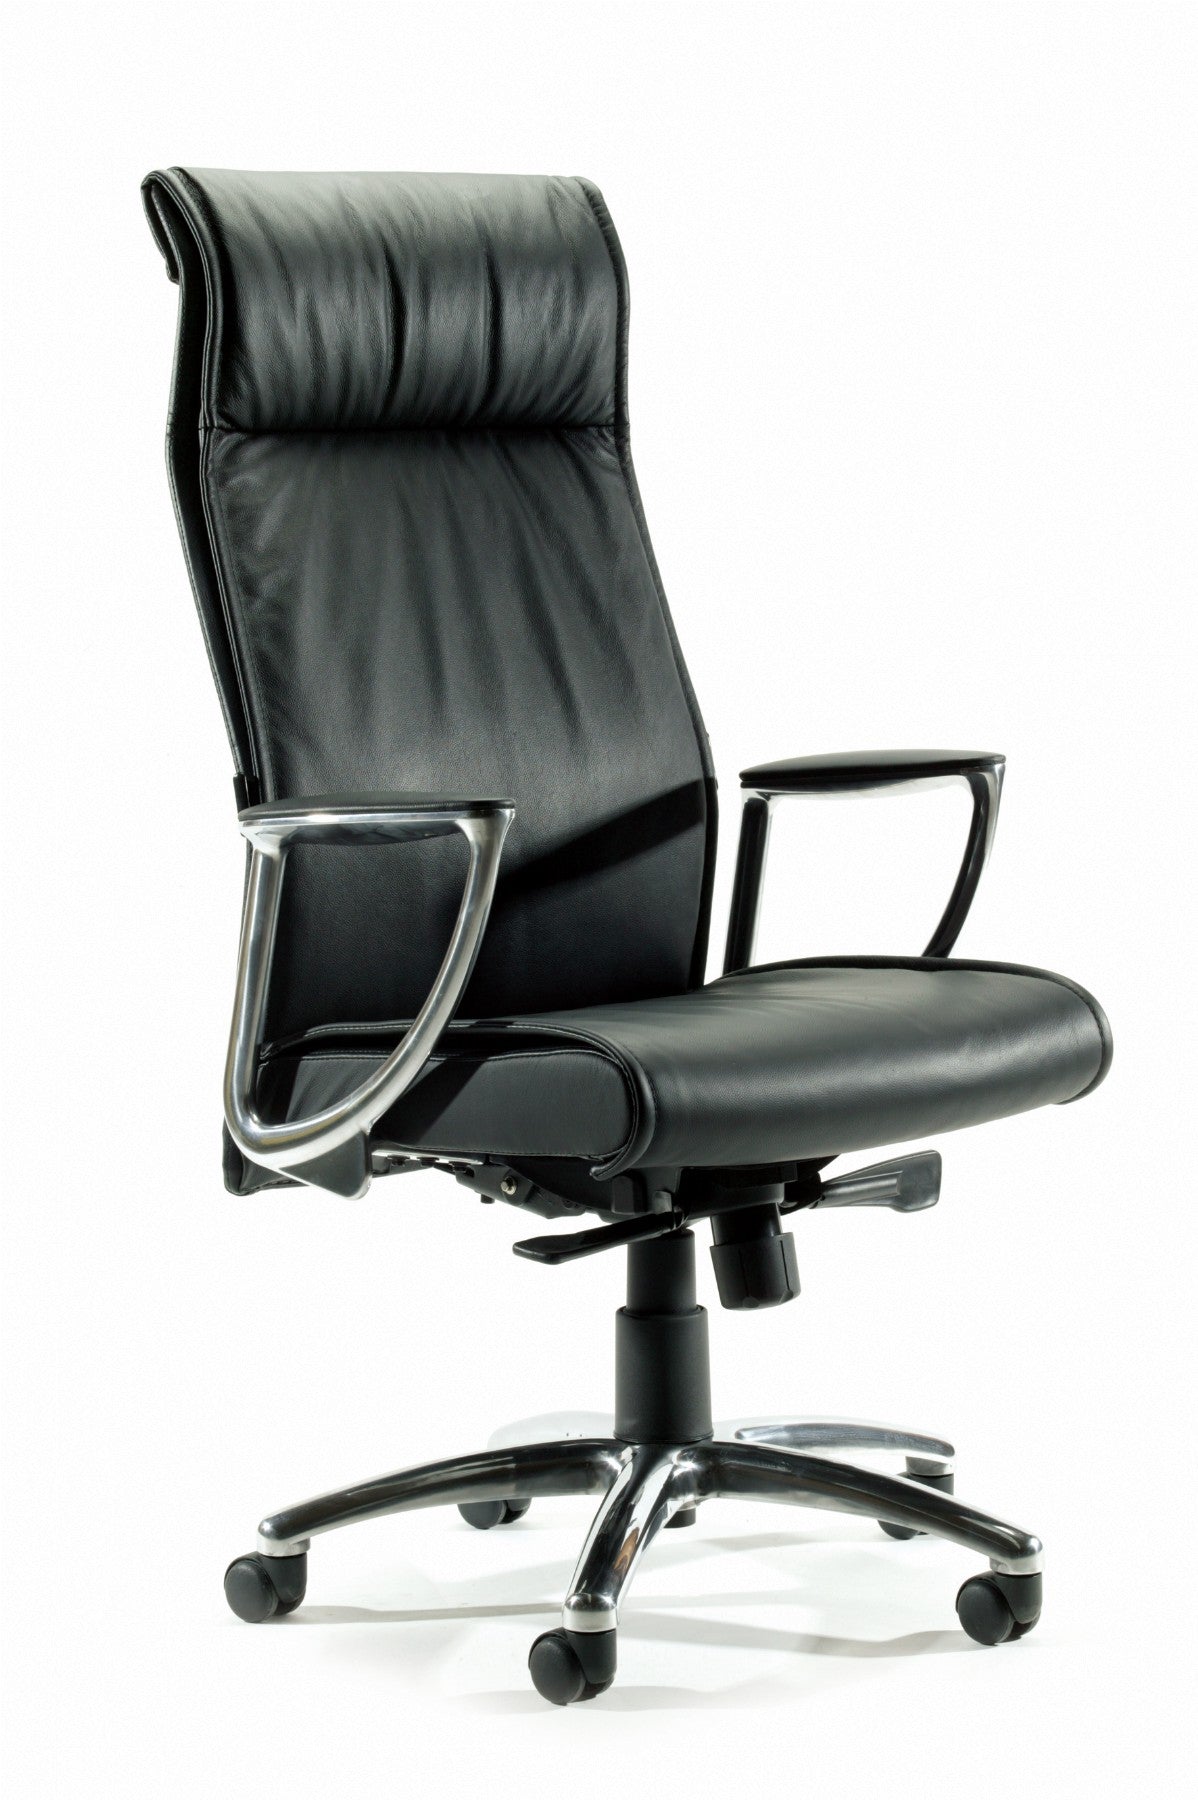 Executive Office Chairs - Leather Office Chair | Commercial Traders NZ